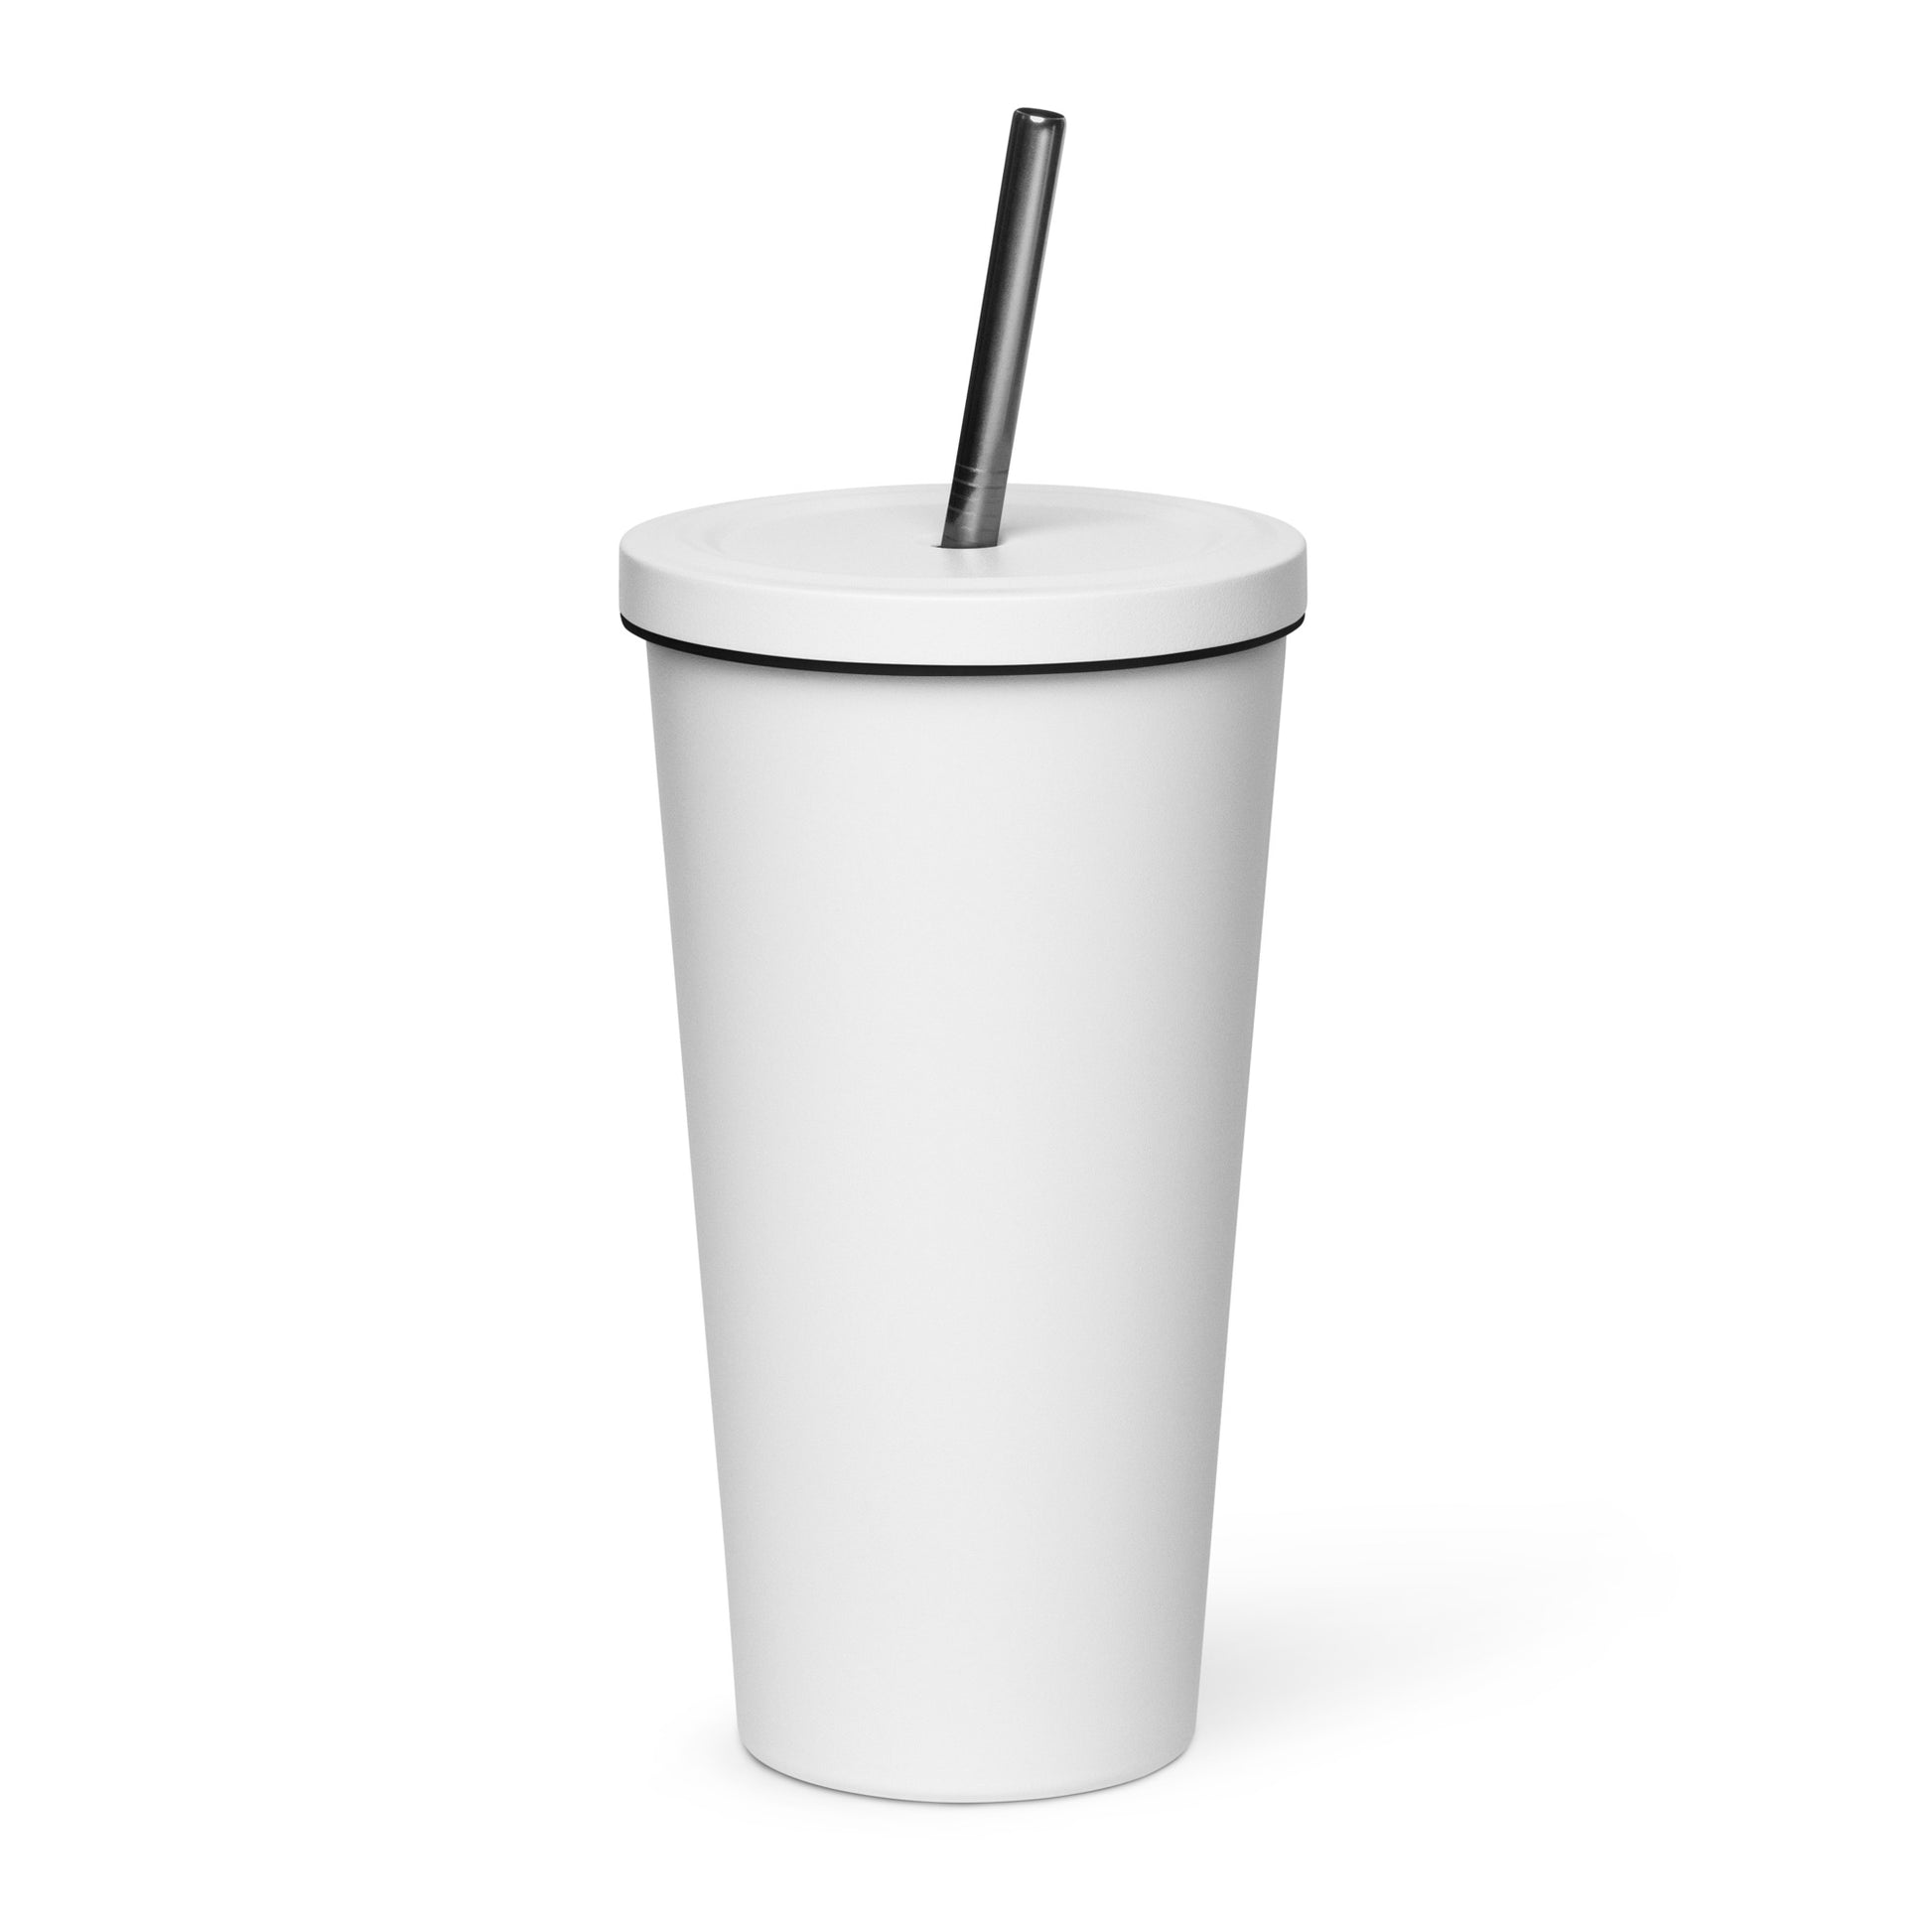 Insulated tumbler with a straw- Crazy Horse 20 - offthespeed